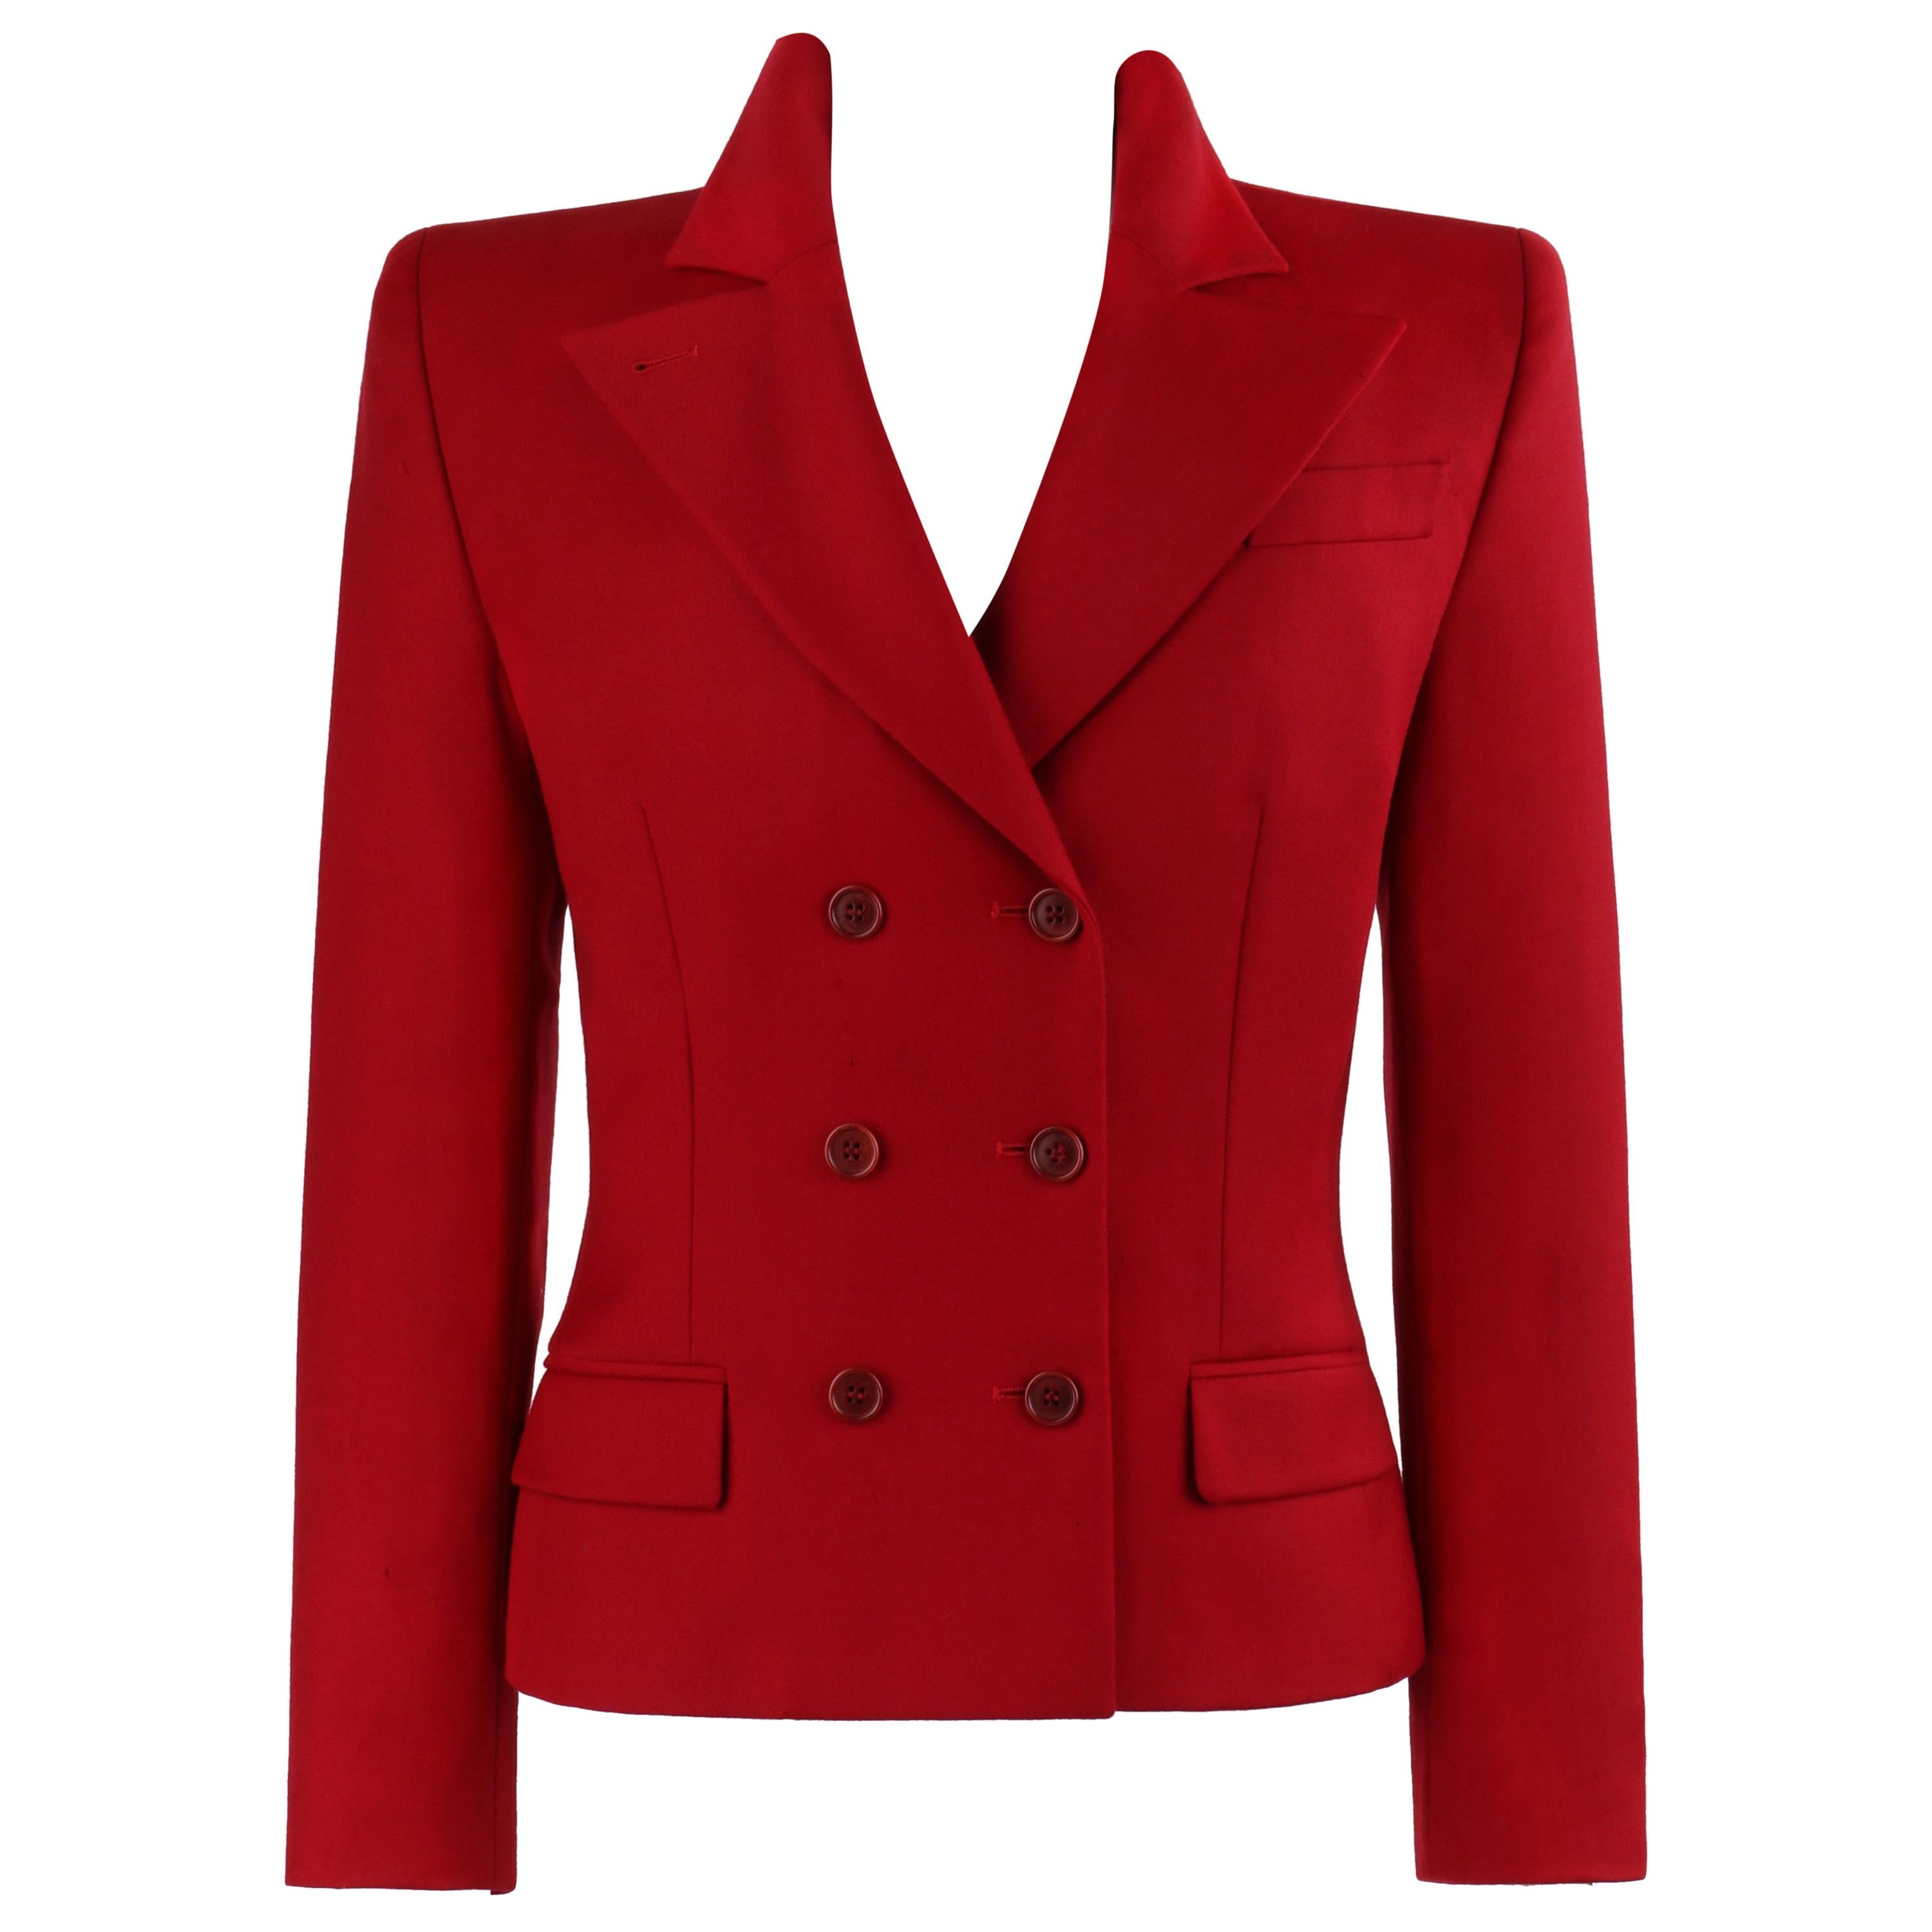 Alexander McQueen Royal Guard Coat from the 